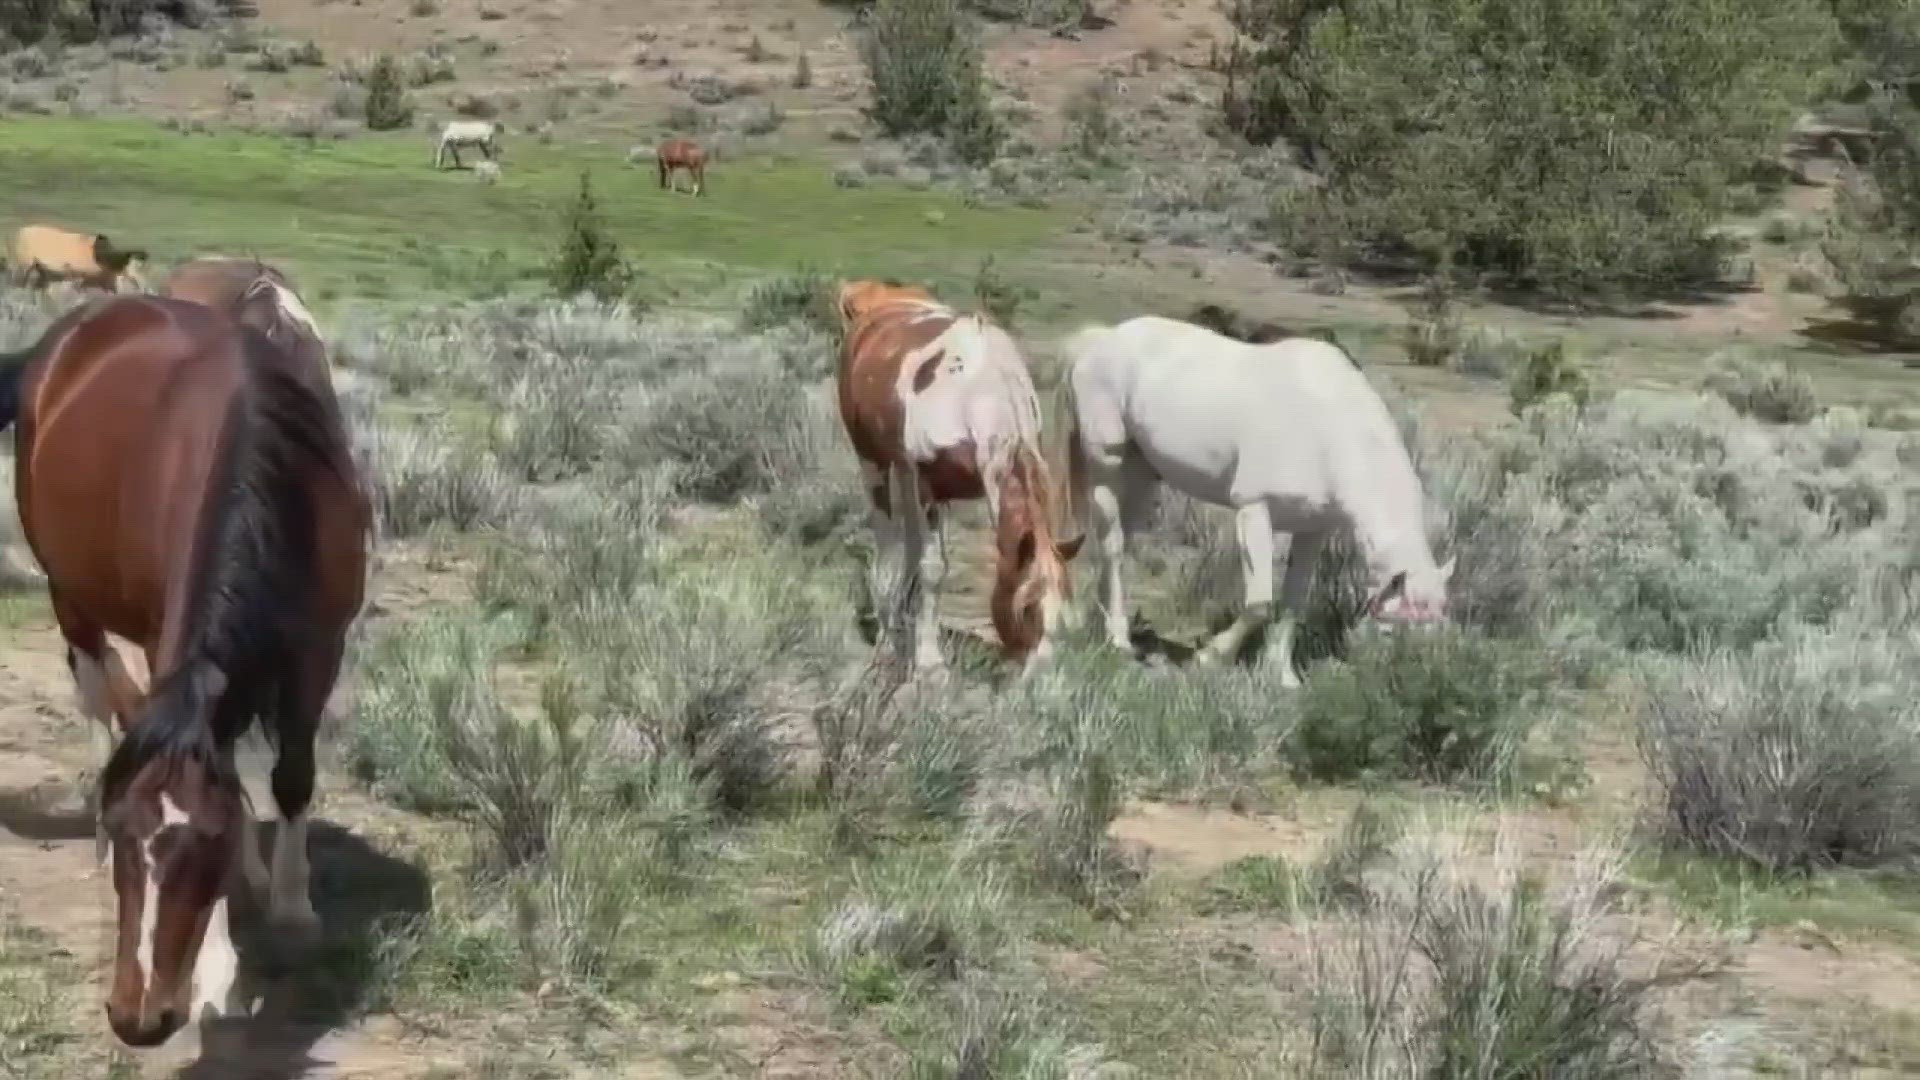 The trio of wild mustangs, better known as "The Maine Three," were saved along with 17 other horses from a farm in Springvale after months of neglect.